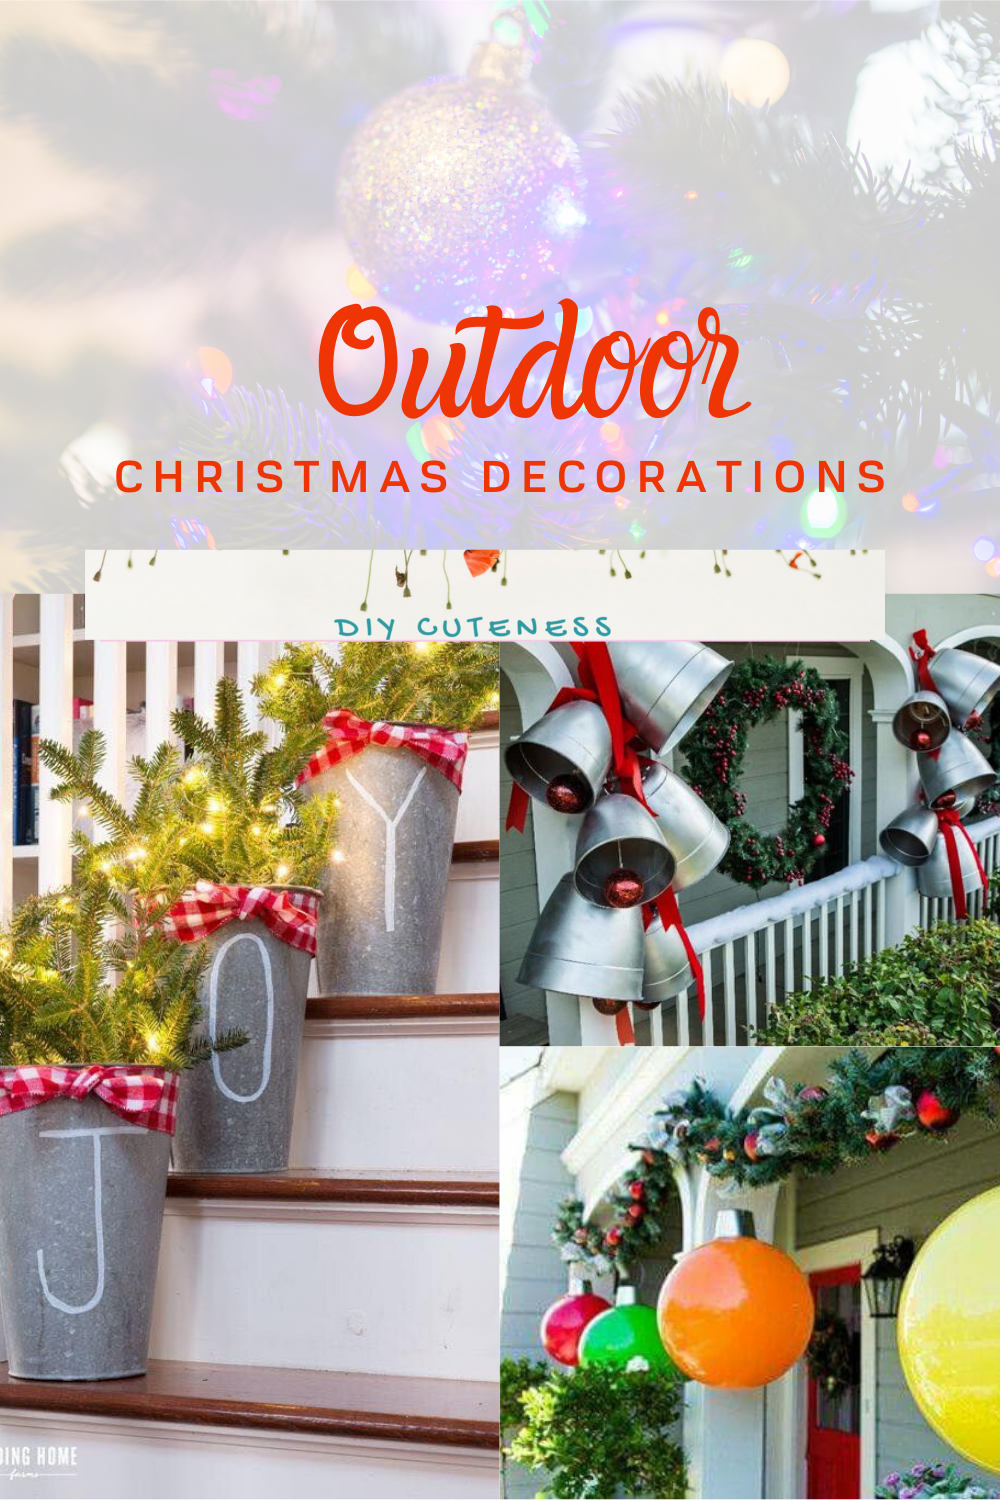 Easy DIY Christmas Decorations for Outside - DIY Cuteness Simple Decor